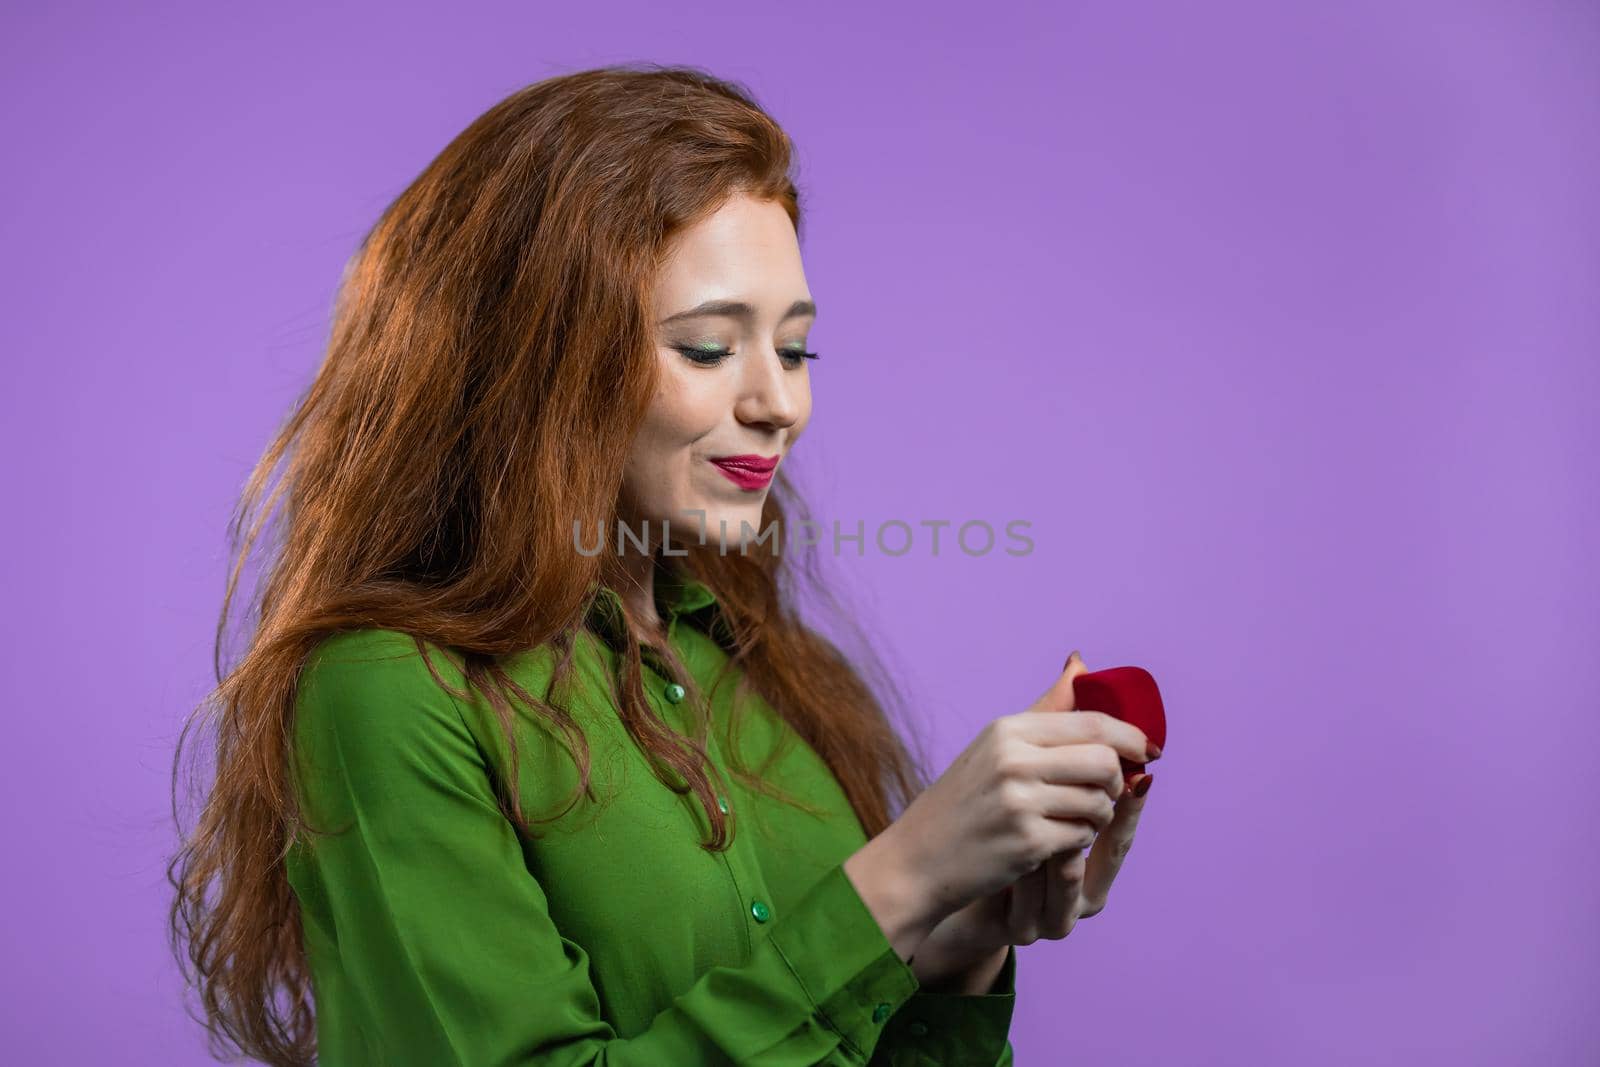 Attractive woman holding small jewelry box with proposal diamond ring on violet wall background. Lady smiling, she is happy to get present, proposition for marriage. High quality photo